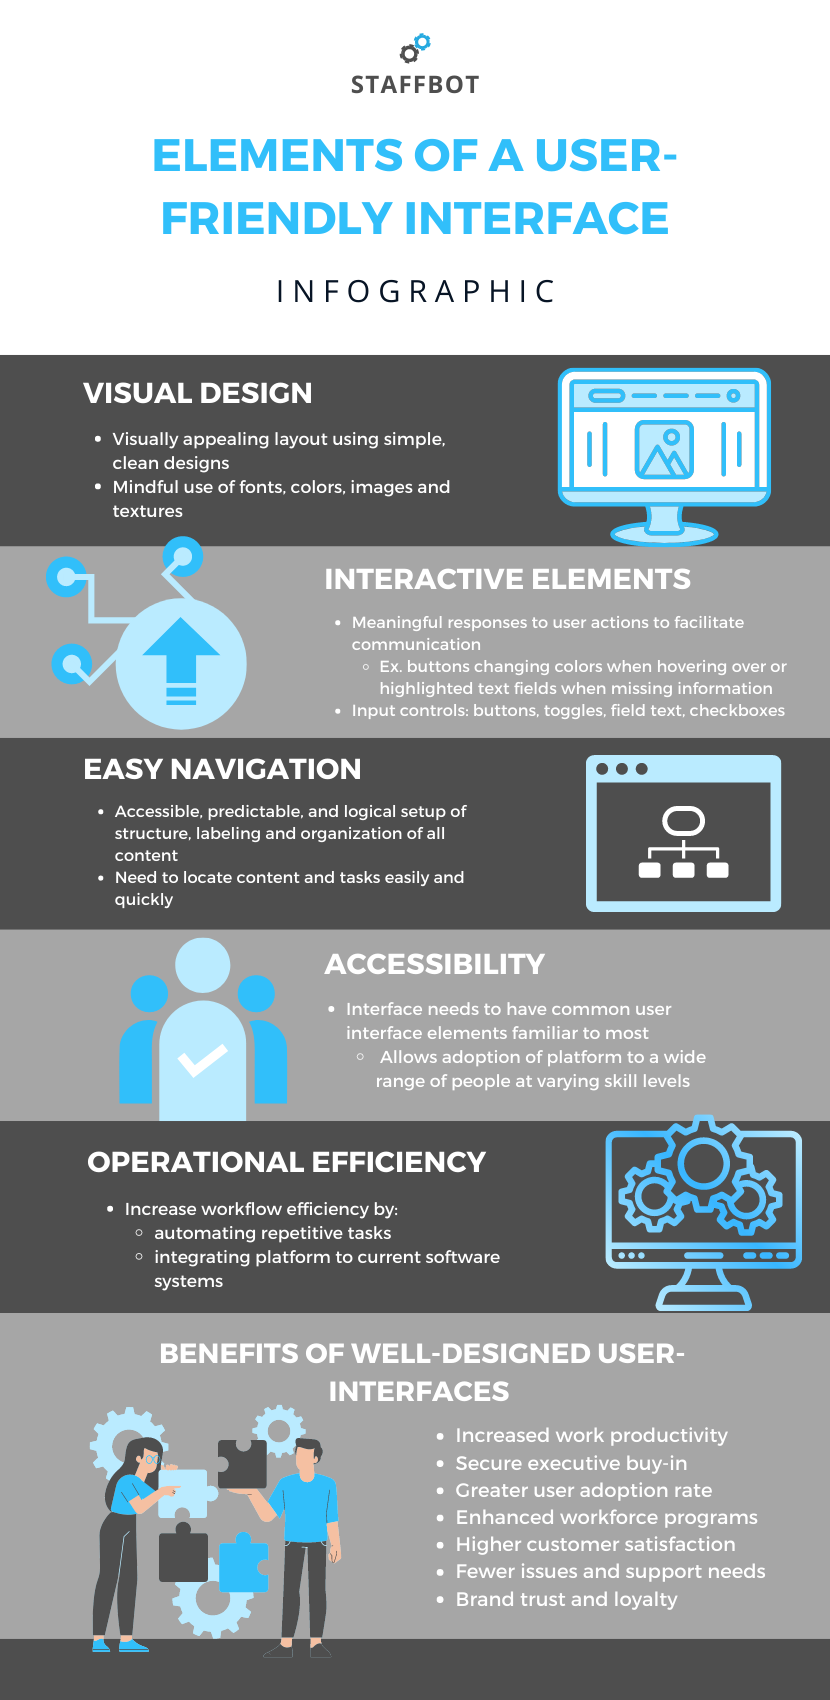 Elements of a user-friendly interface infographic